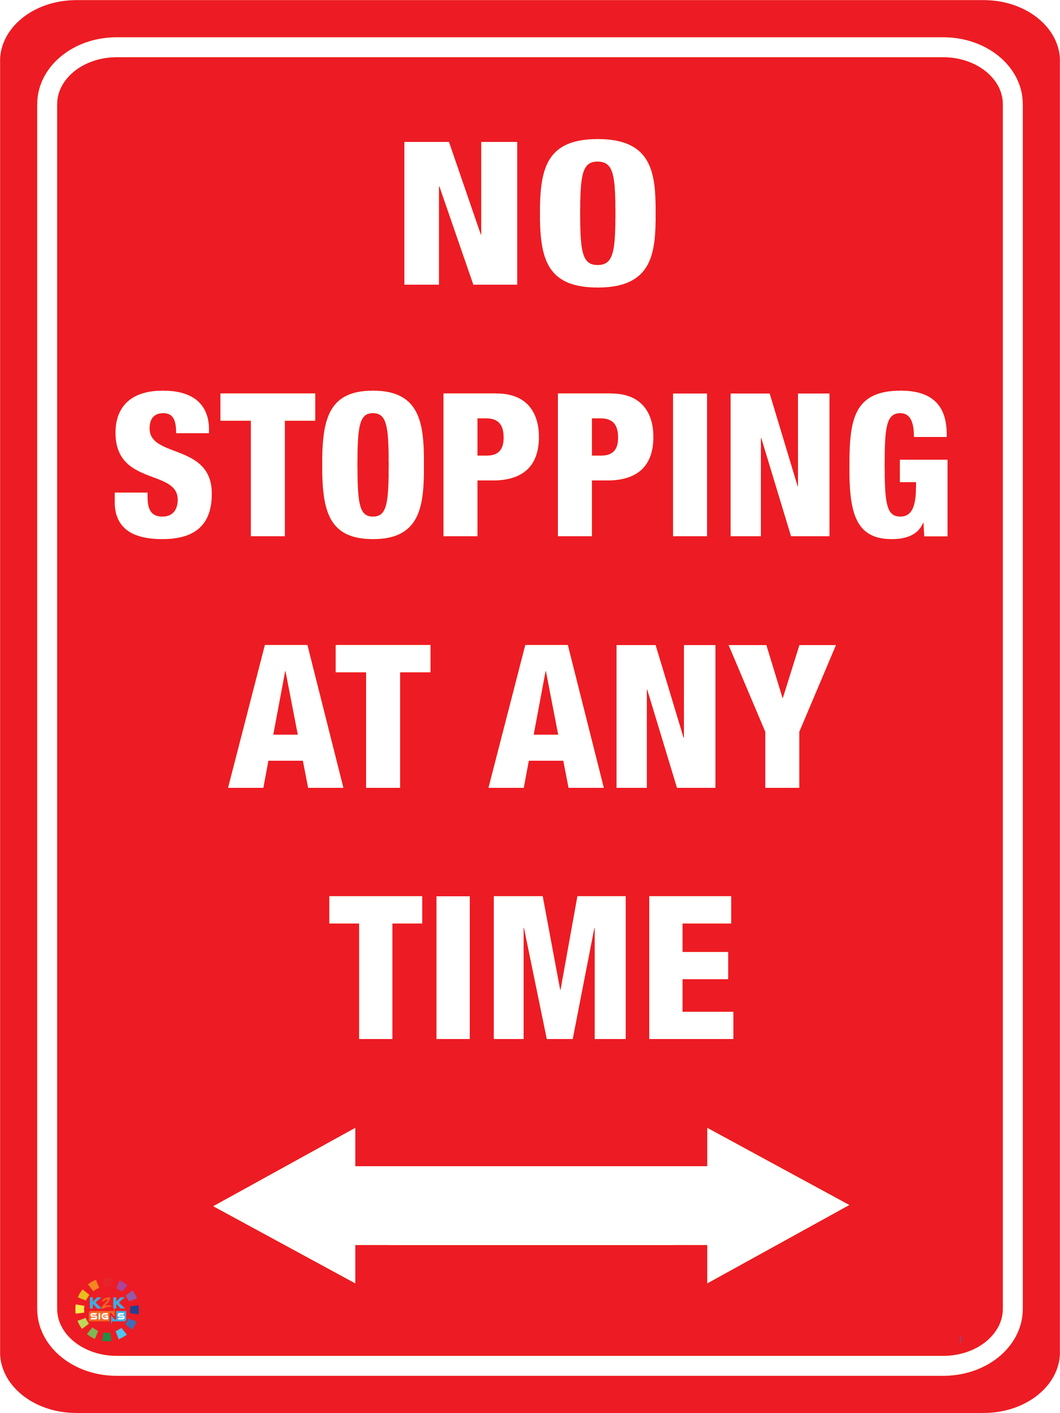 No Stopping Any Time (Two Way Arrow) Sign